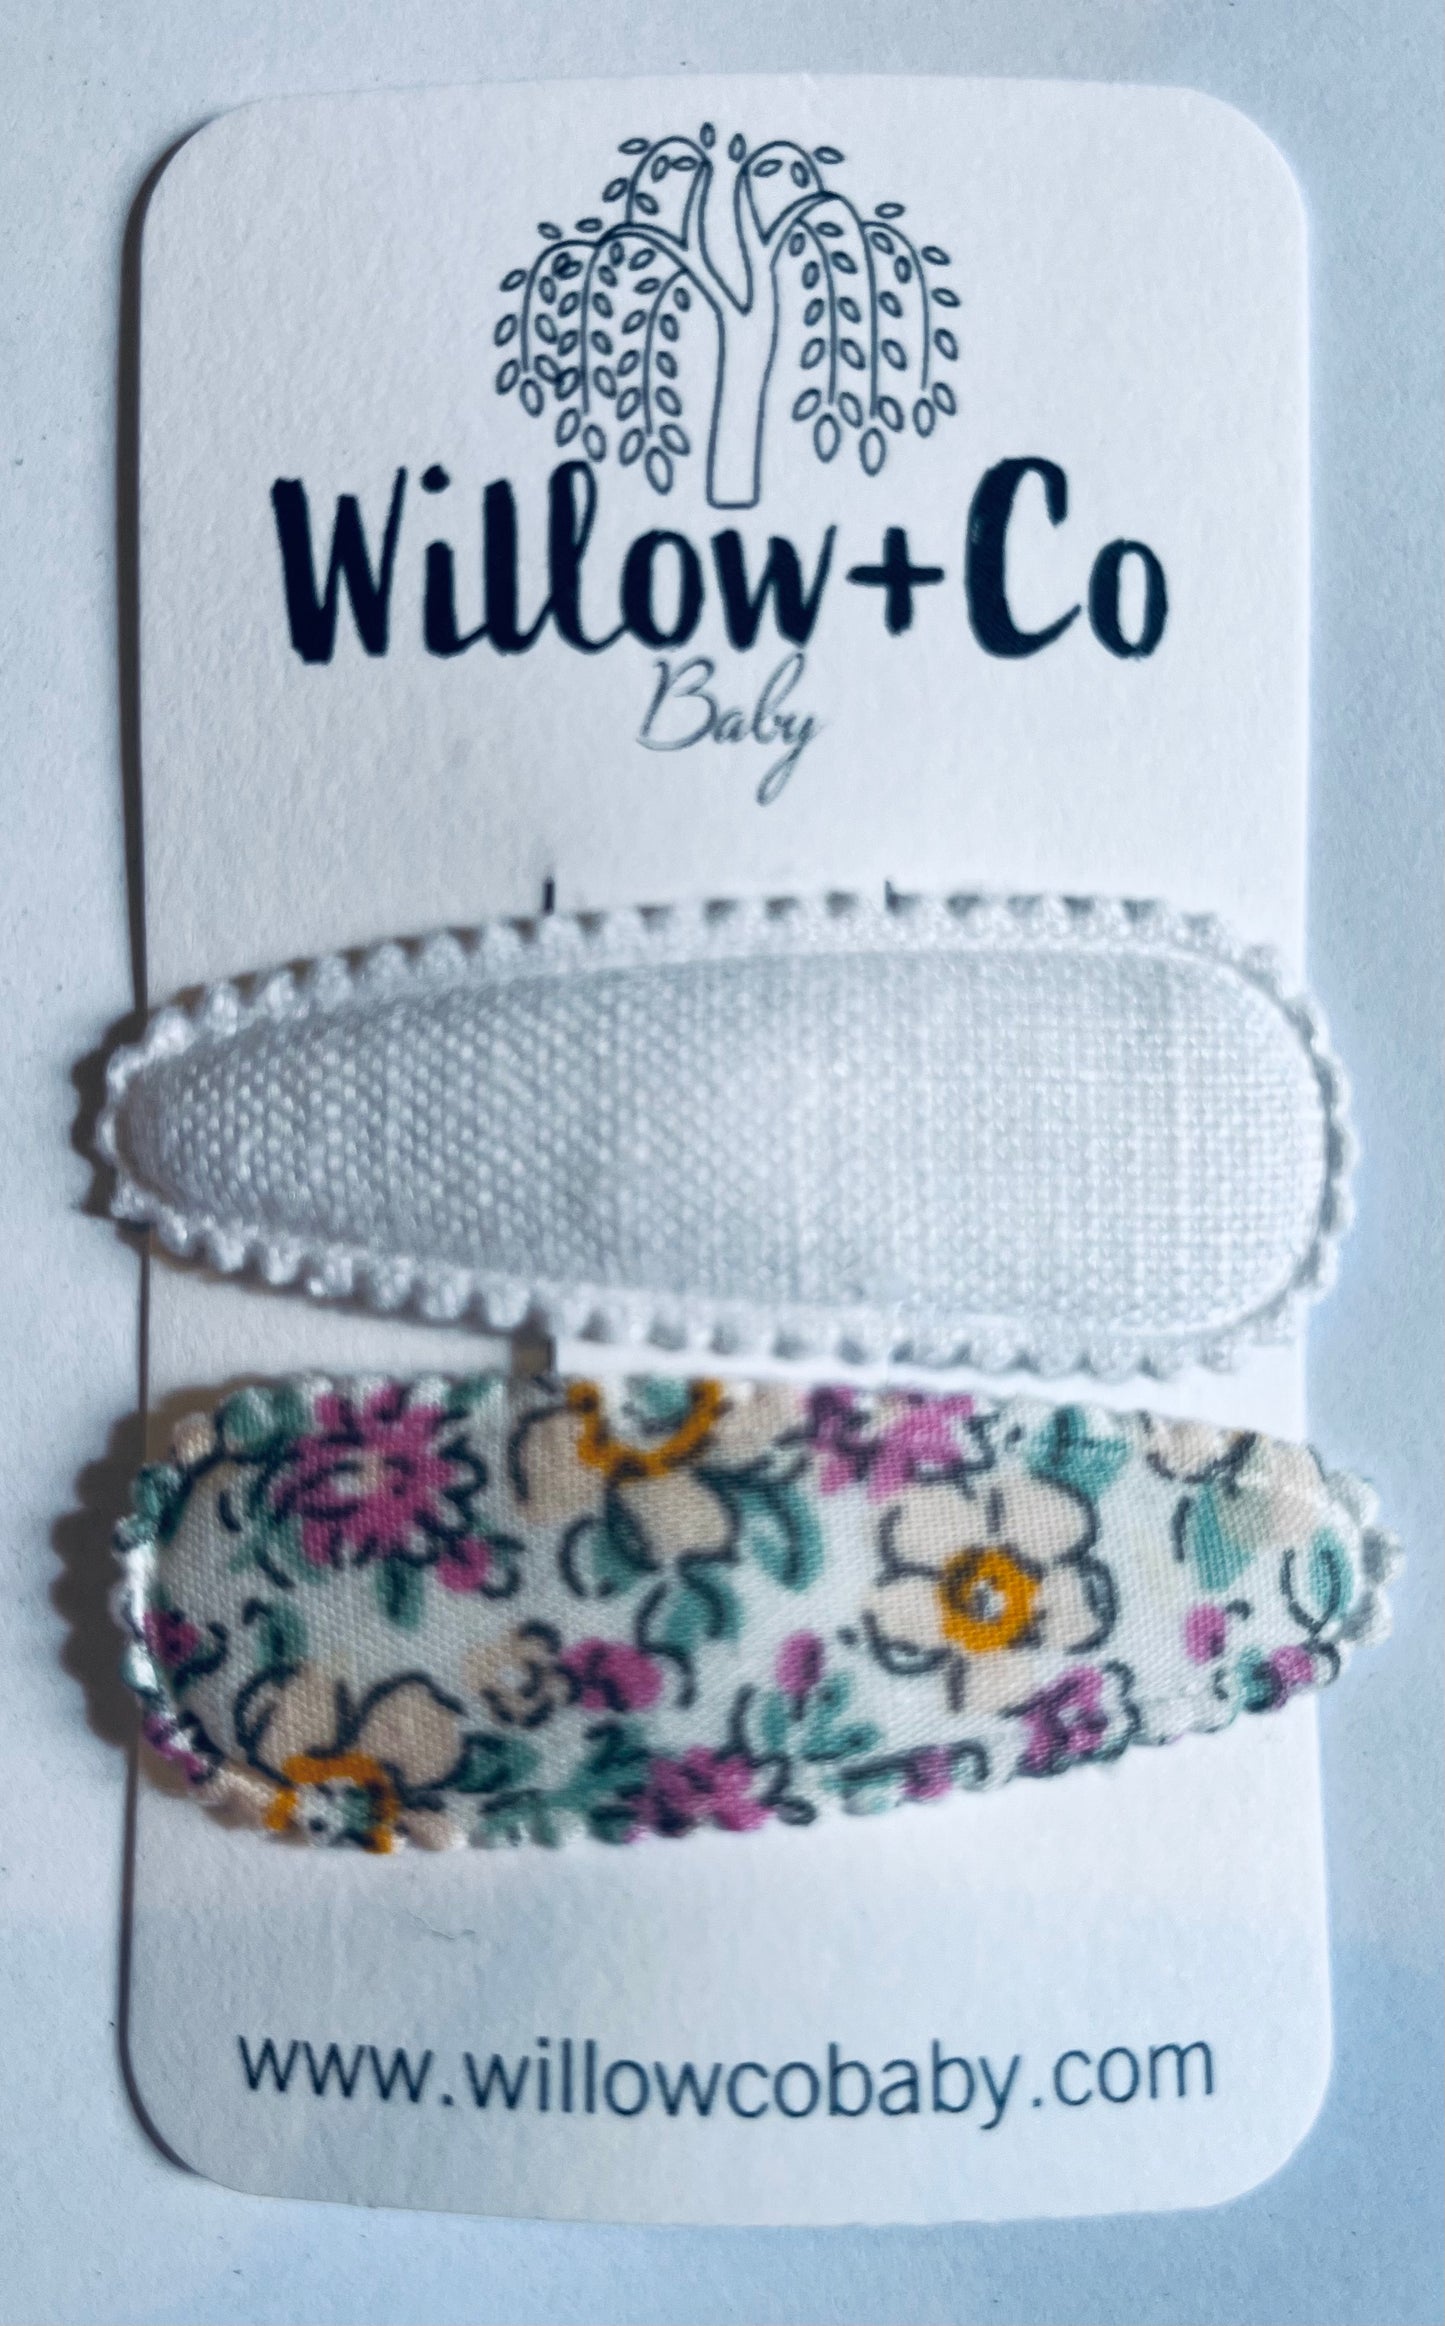 FABRIC SNAP CLIPS - WHITE & AUDREY FLORAL